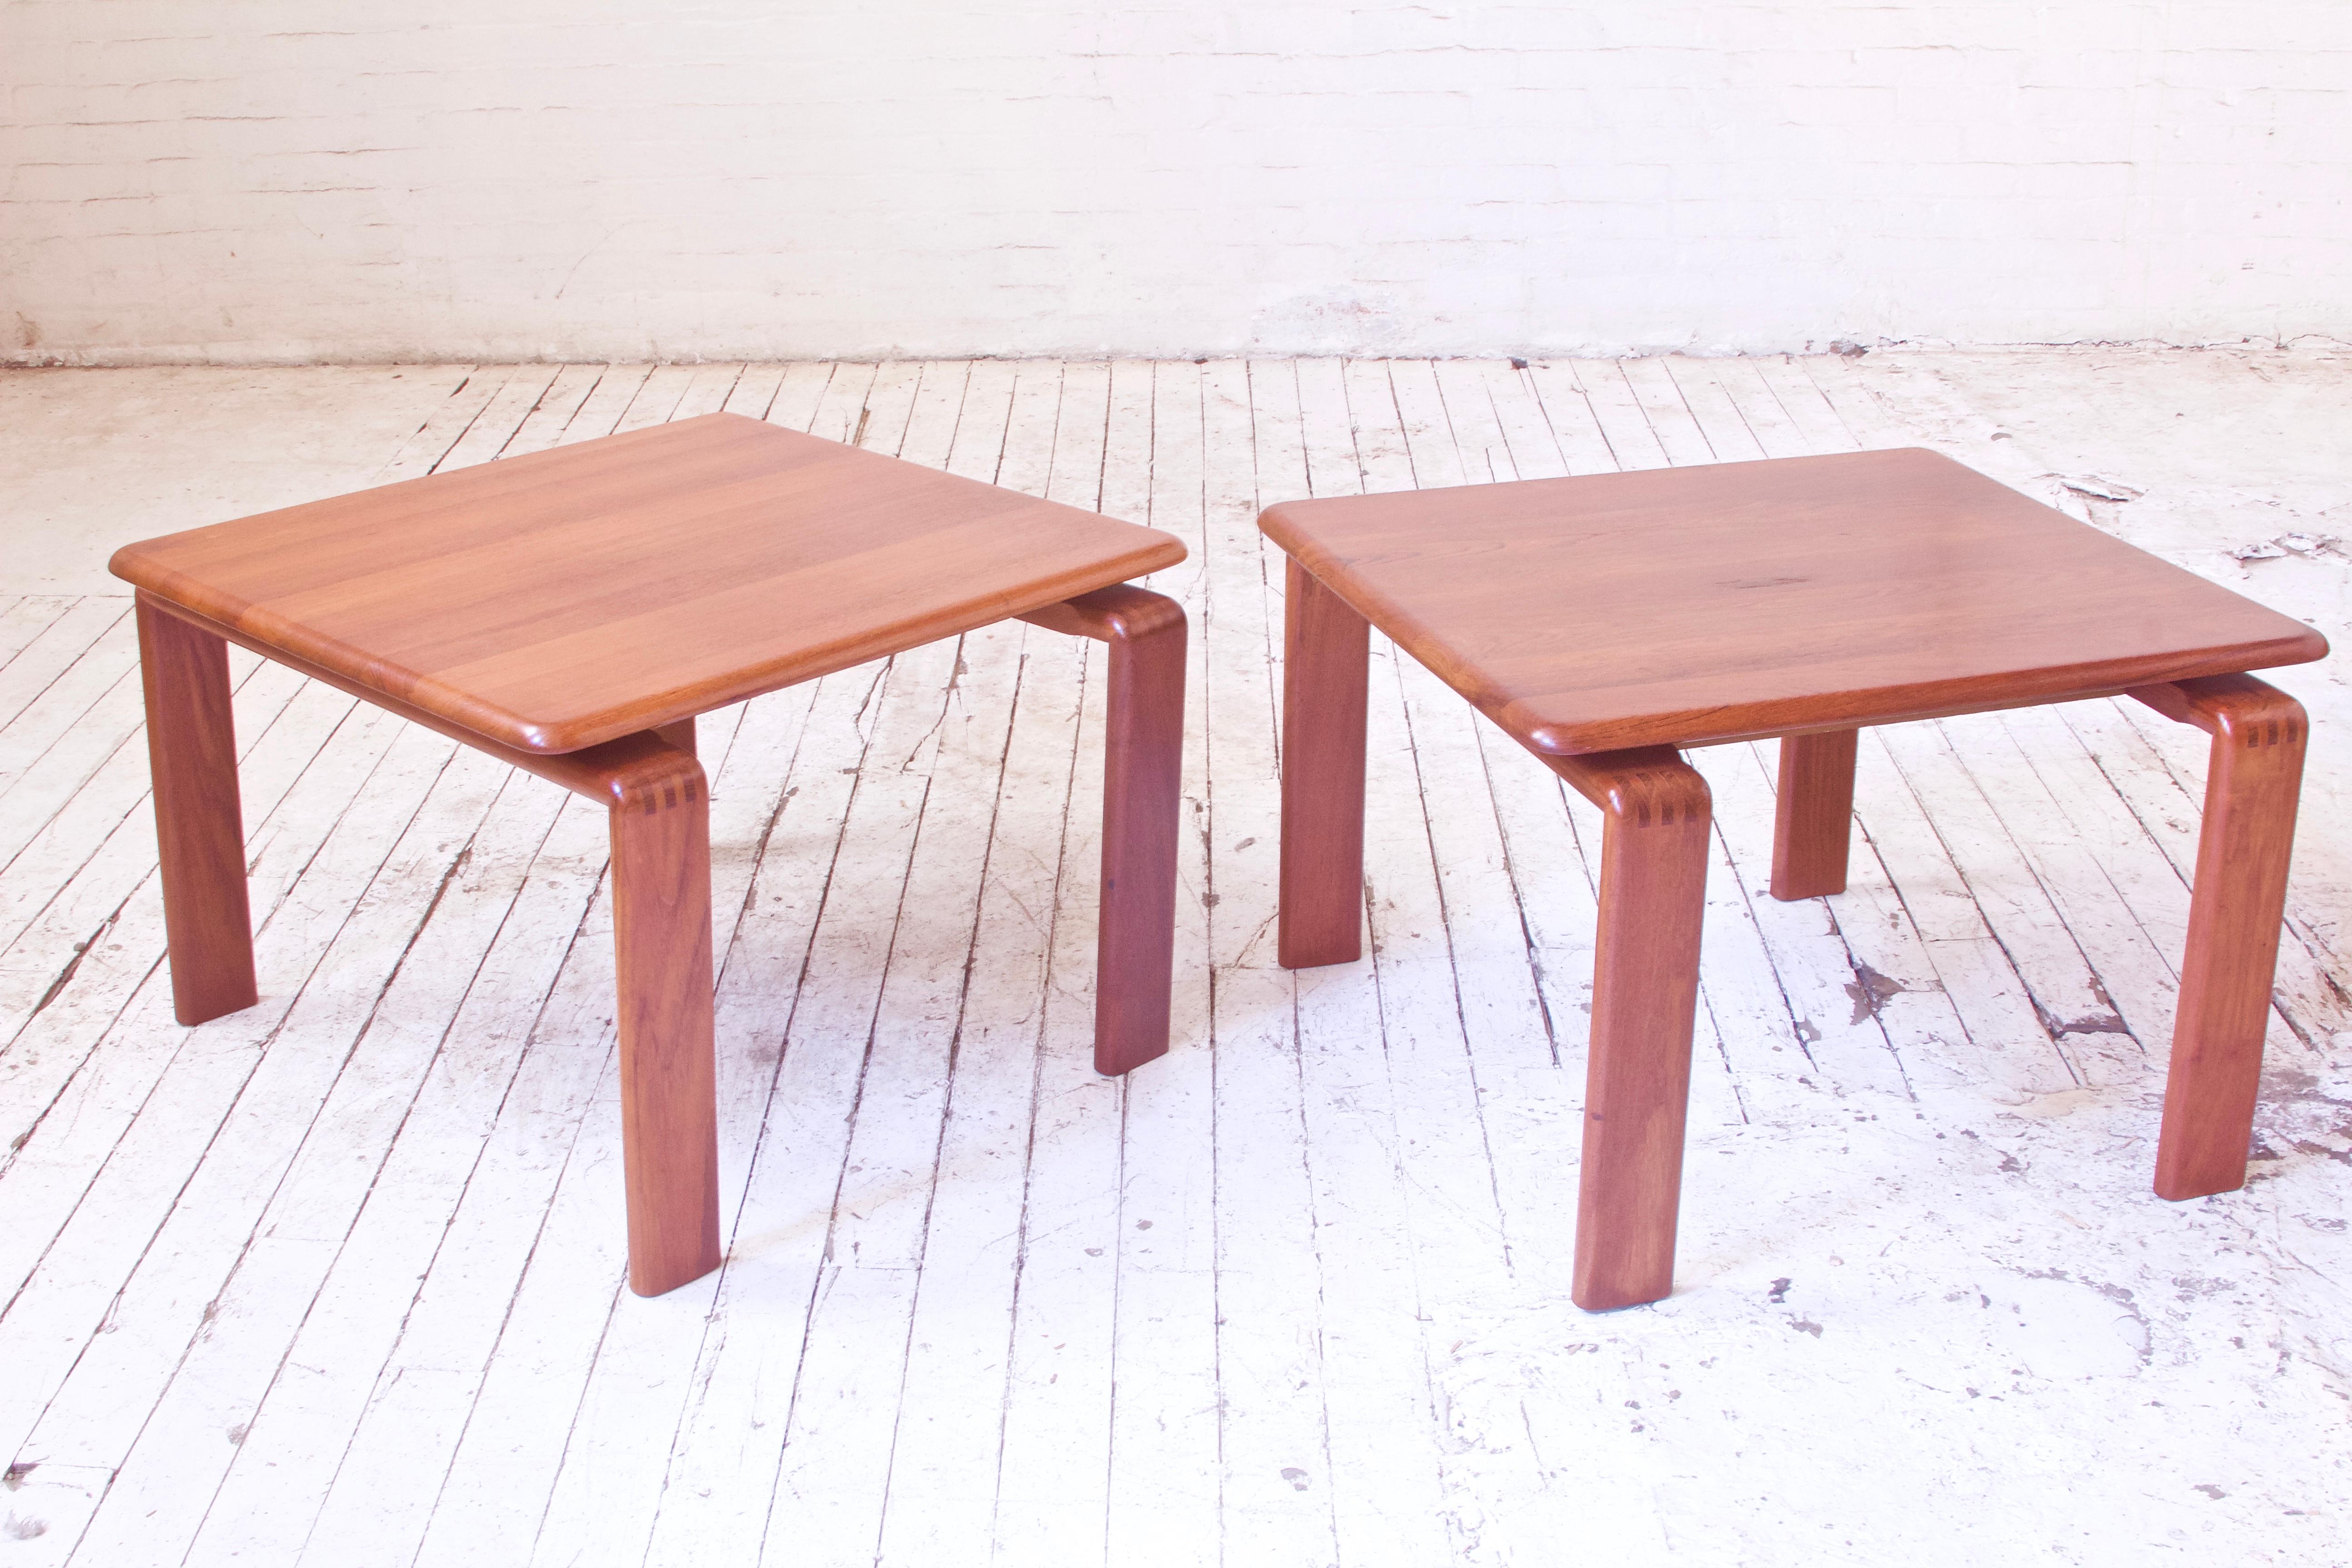 A lovely and richly-patinated pair of solid figured teak side or end tables in excellent vintage condition. Nice floating top design and rock solid exposed finger joinery make this pair stand out. Excellent sturdy construction is on display and